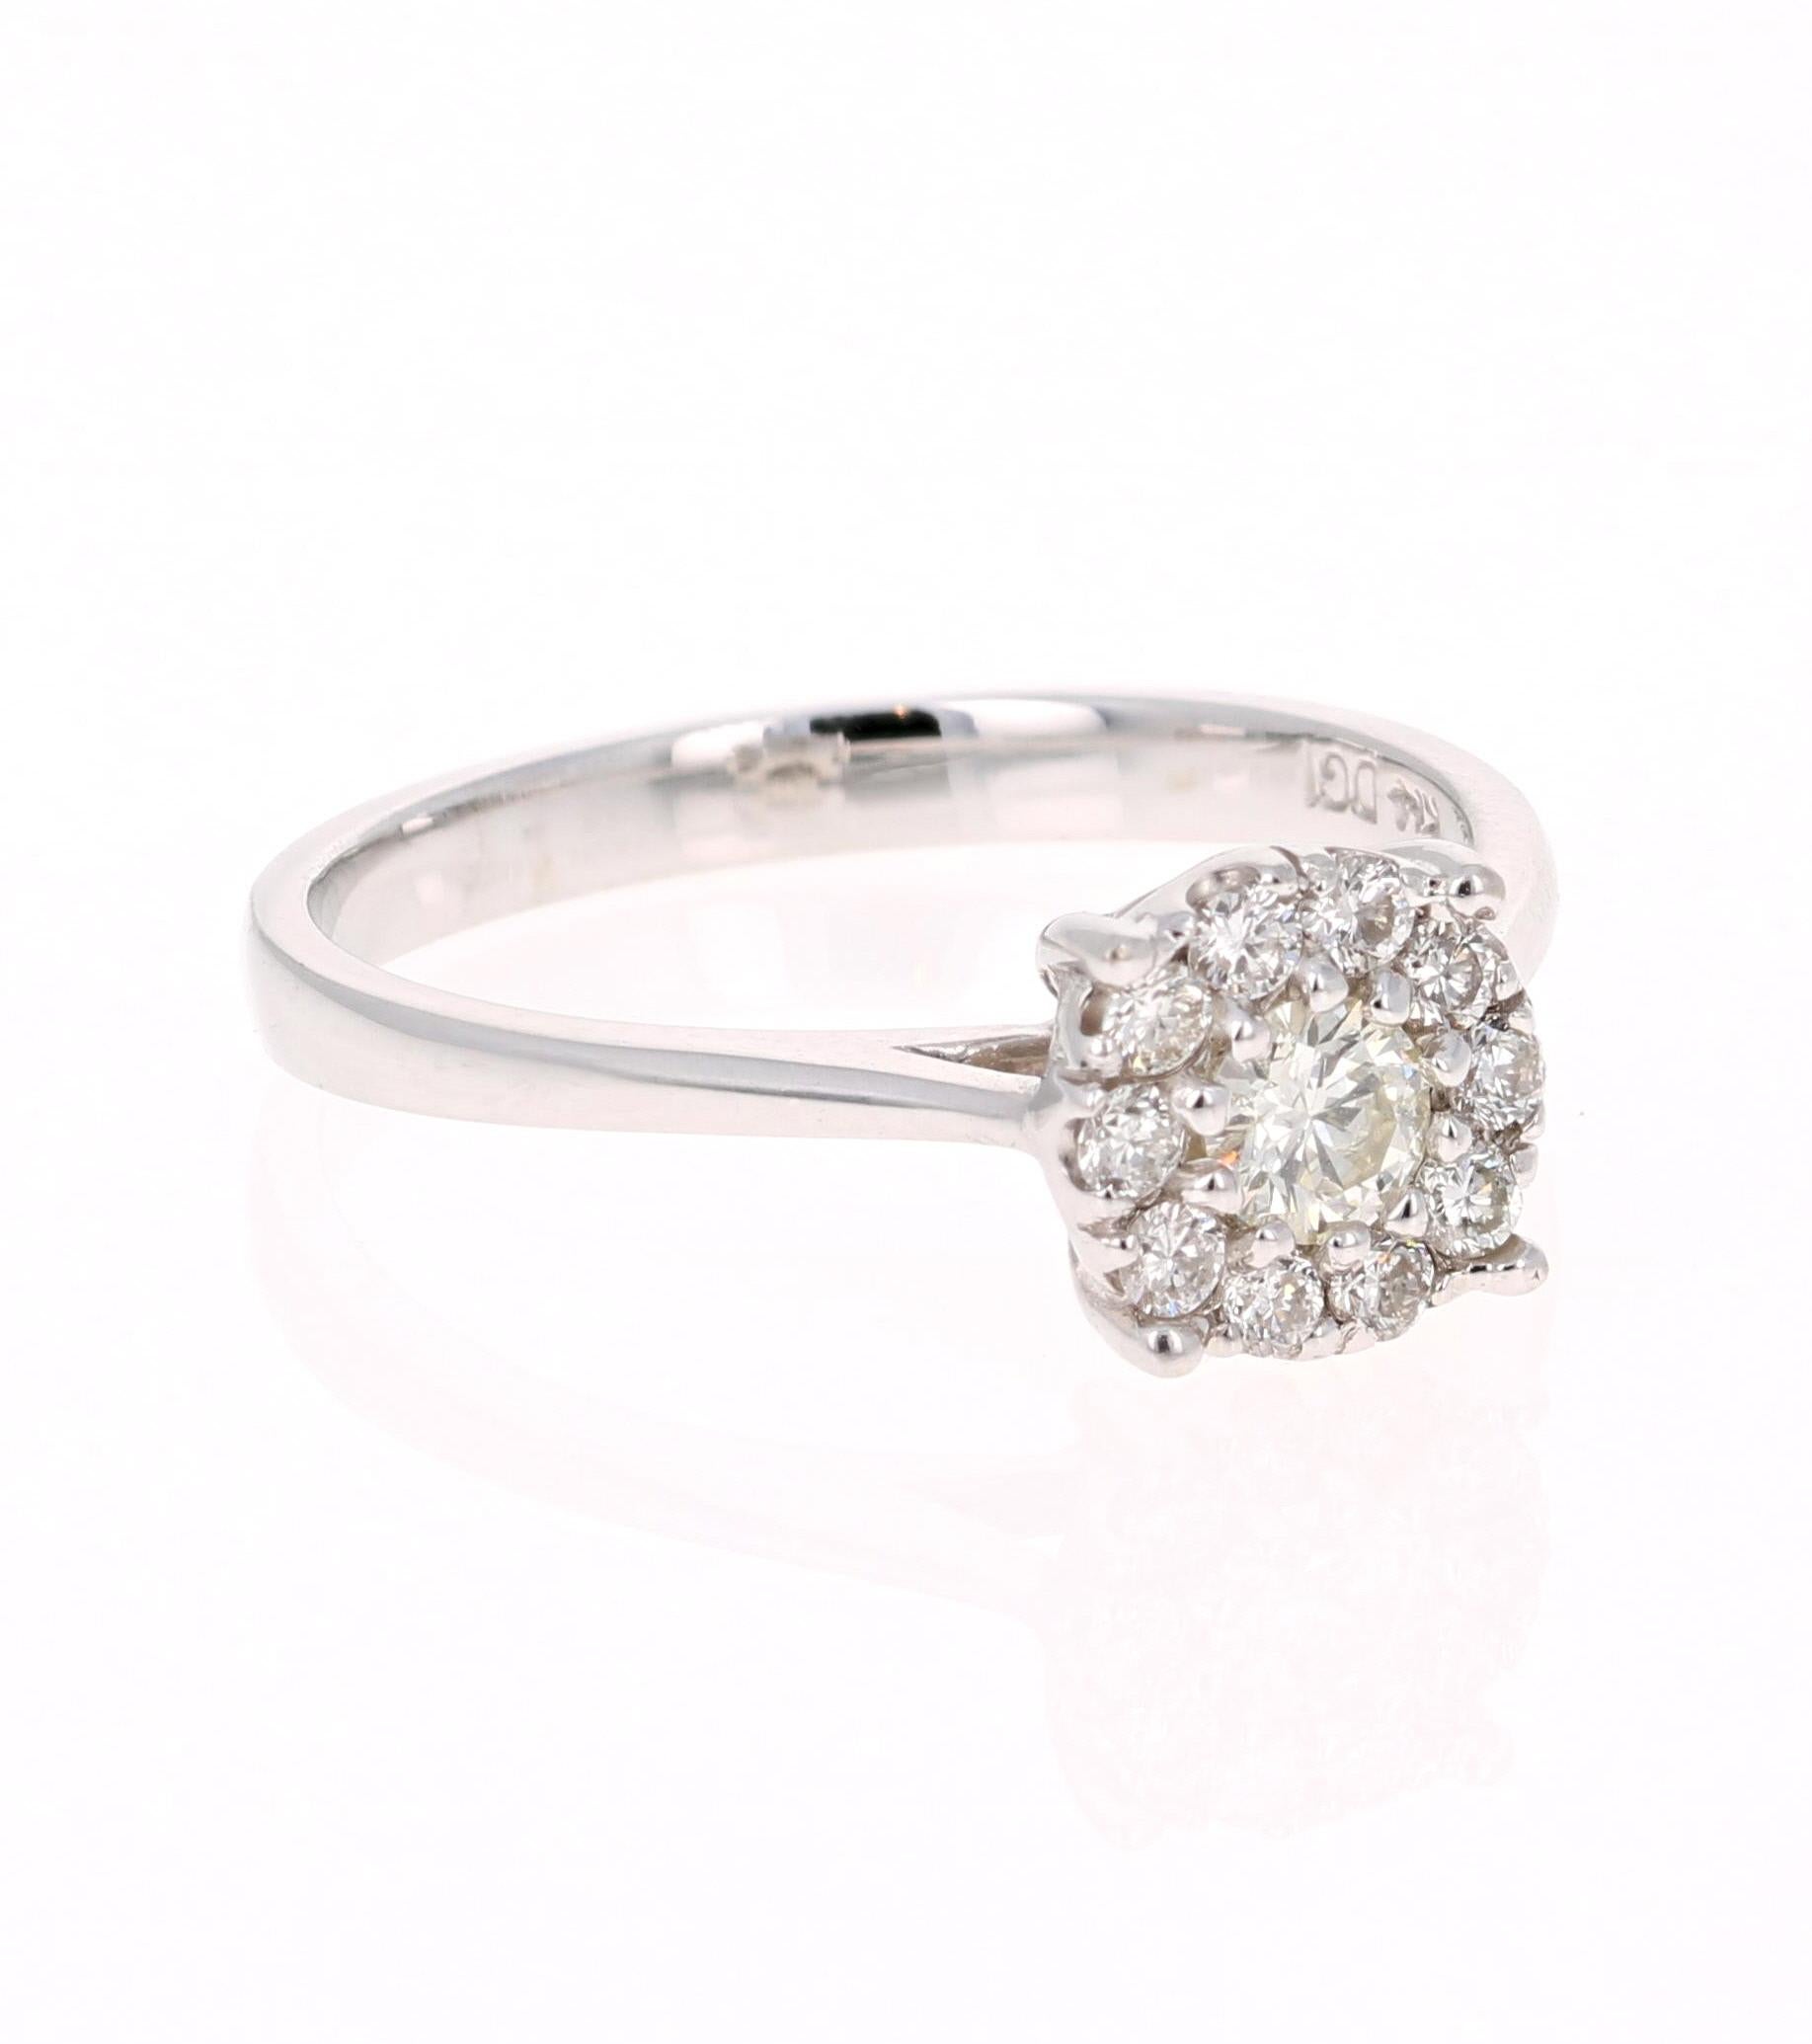 Beautiful Engagement or Every Day Ring!

This beautiful ring has 1 Round Cut Diamond that weighs 0.19 Carats and has 10 Round Cut Diamonds floating around it that weigh 0.22 Carats. The total carat weight of the ring is 0.41 Carats. The clarity and